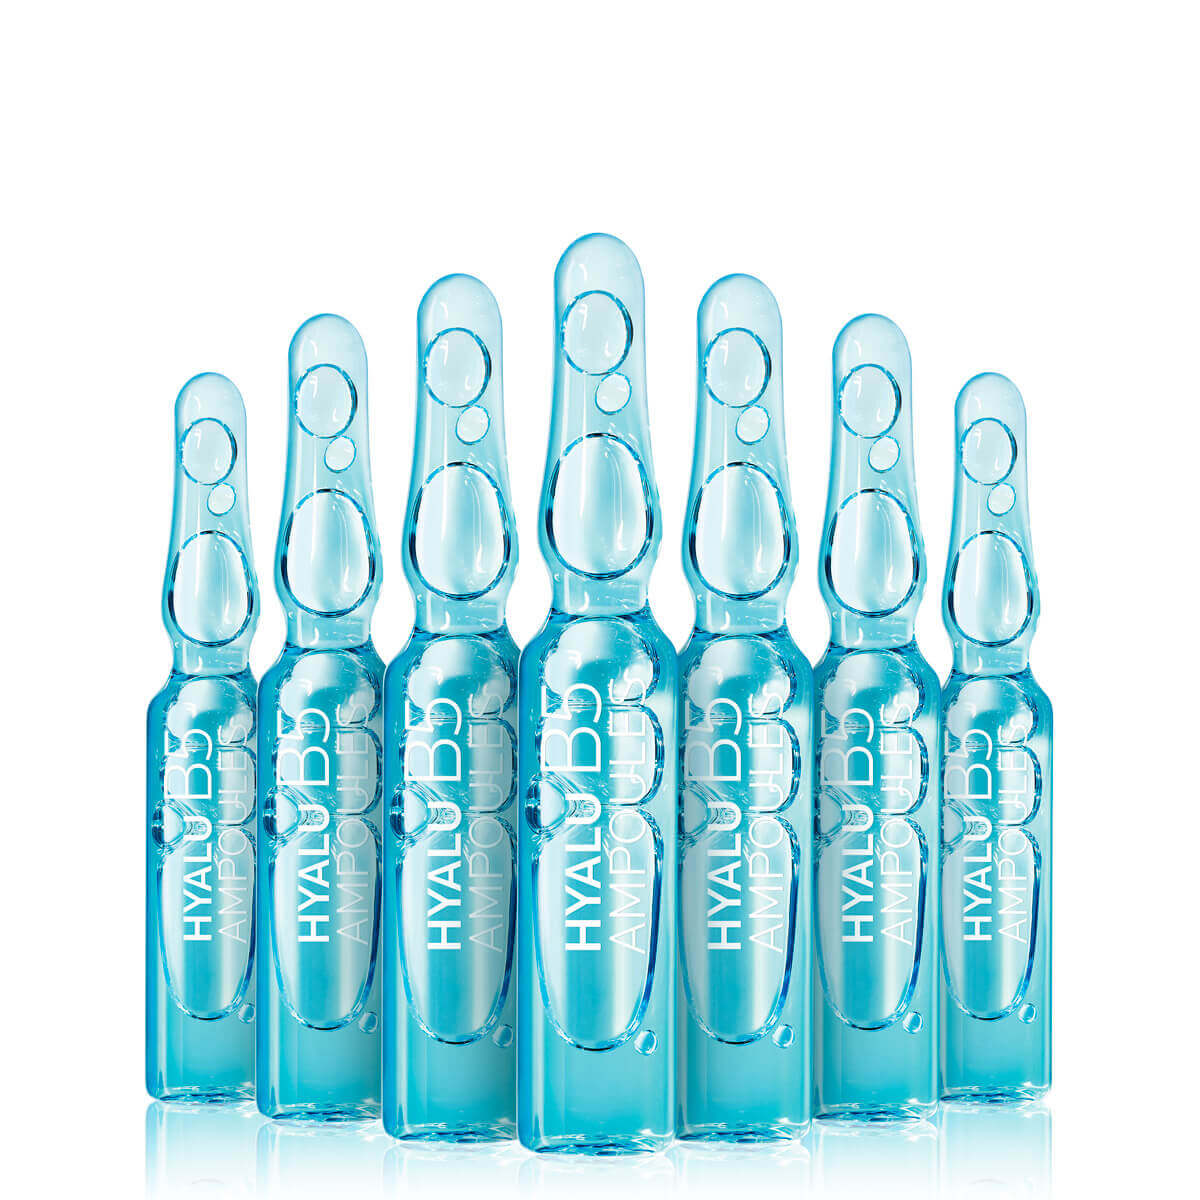 LaRochePosay-Product-HYALUB5-ampoules-packx7__1_.png